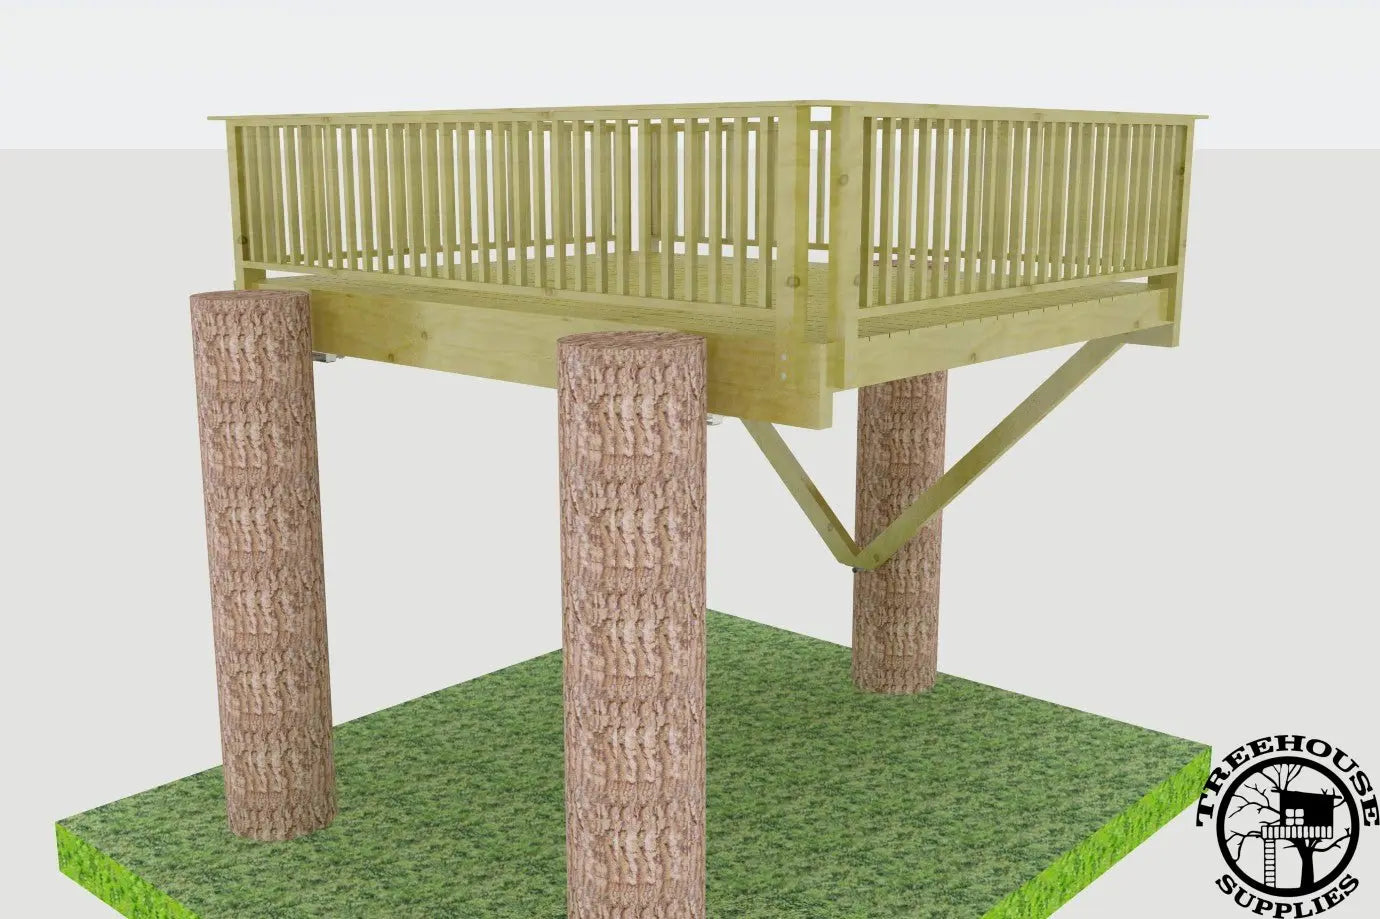 3 TREE TRI-BEAM AND SINGLE BEAM KIT - DELUXE - Treehouse Supplies